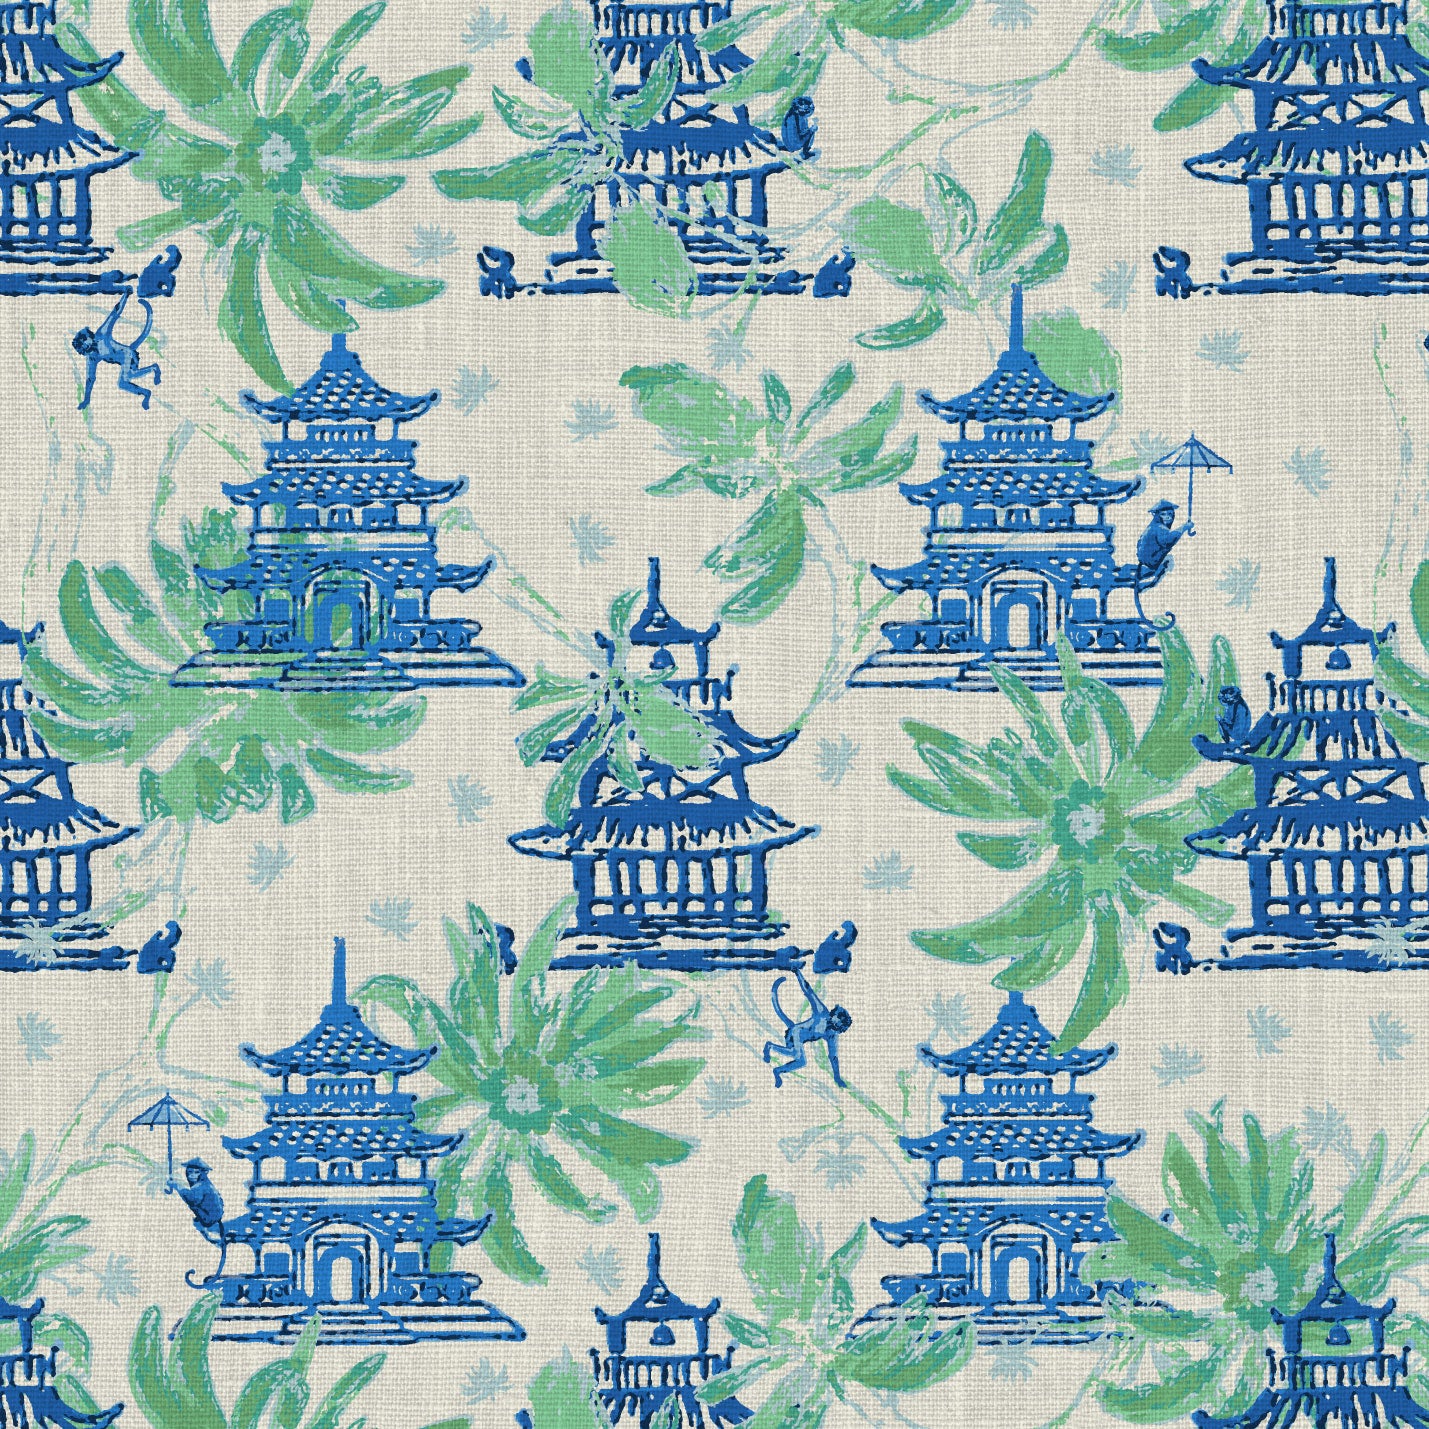 Natural Textured Eco-Friendly Non-toxic High-quality Sustainable practices Sustainability Wall covering Wallcovering Wallpaper luxury bespoke custom interior design asian inspired green palm leaf garden print floral tree branches pagoda shades of blue french blue monkey retro chic grid Chinoiserie chinese classic chintz french blue green linen